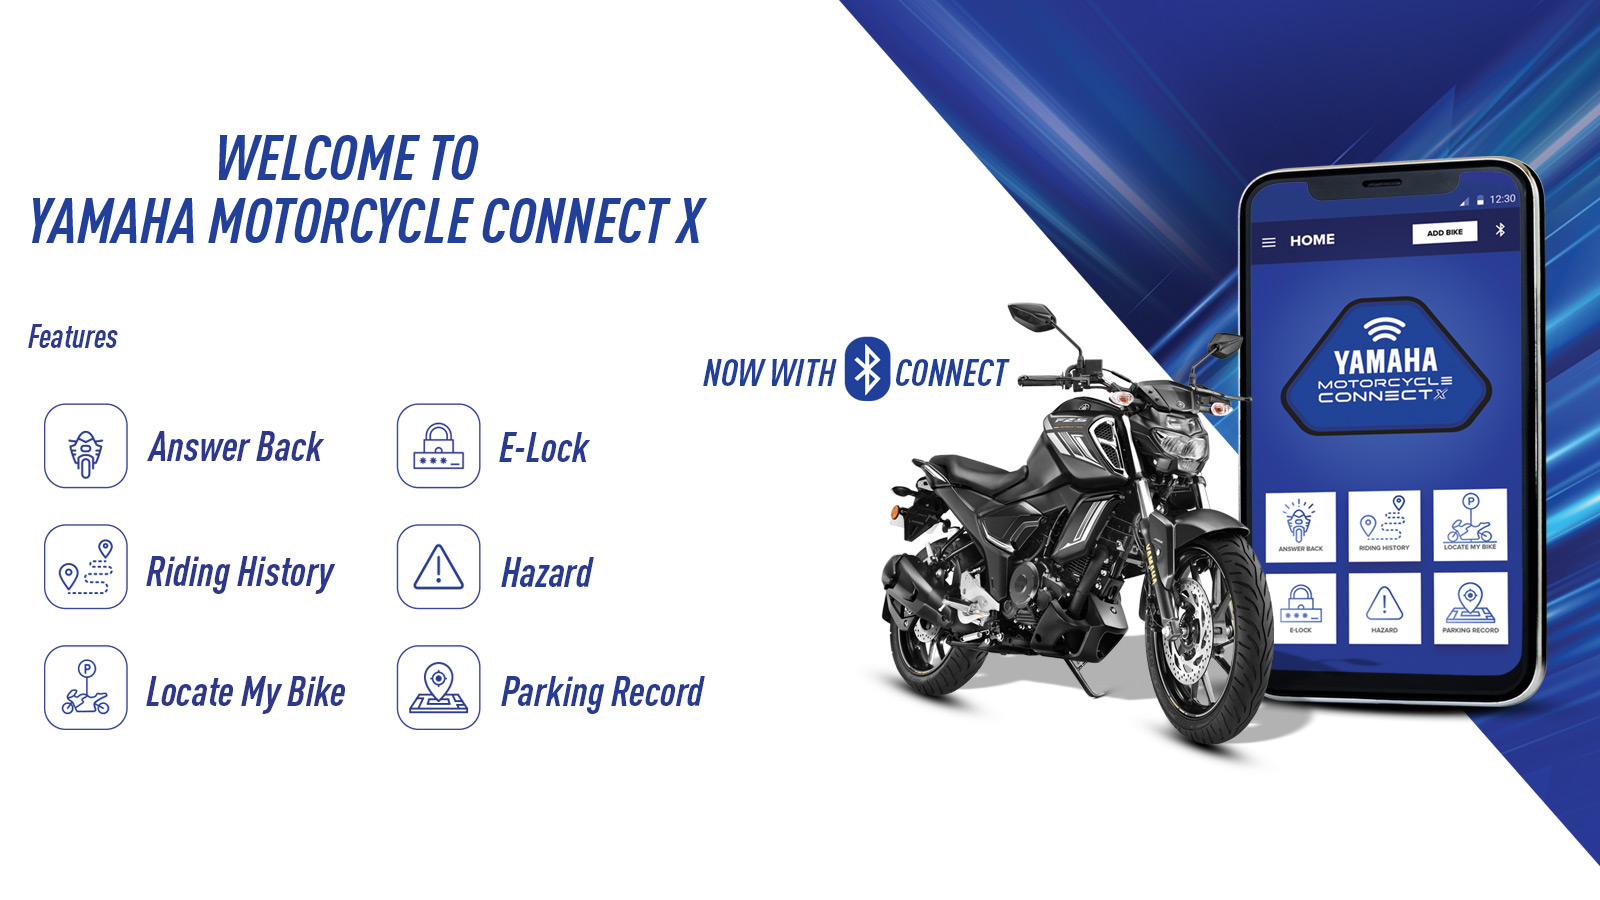 Yamaha Launches Bluetooth Connectivity “Yamaha Motorcycle Connect X” Application